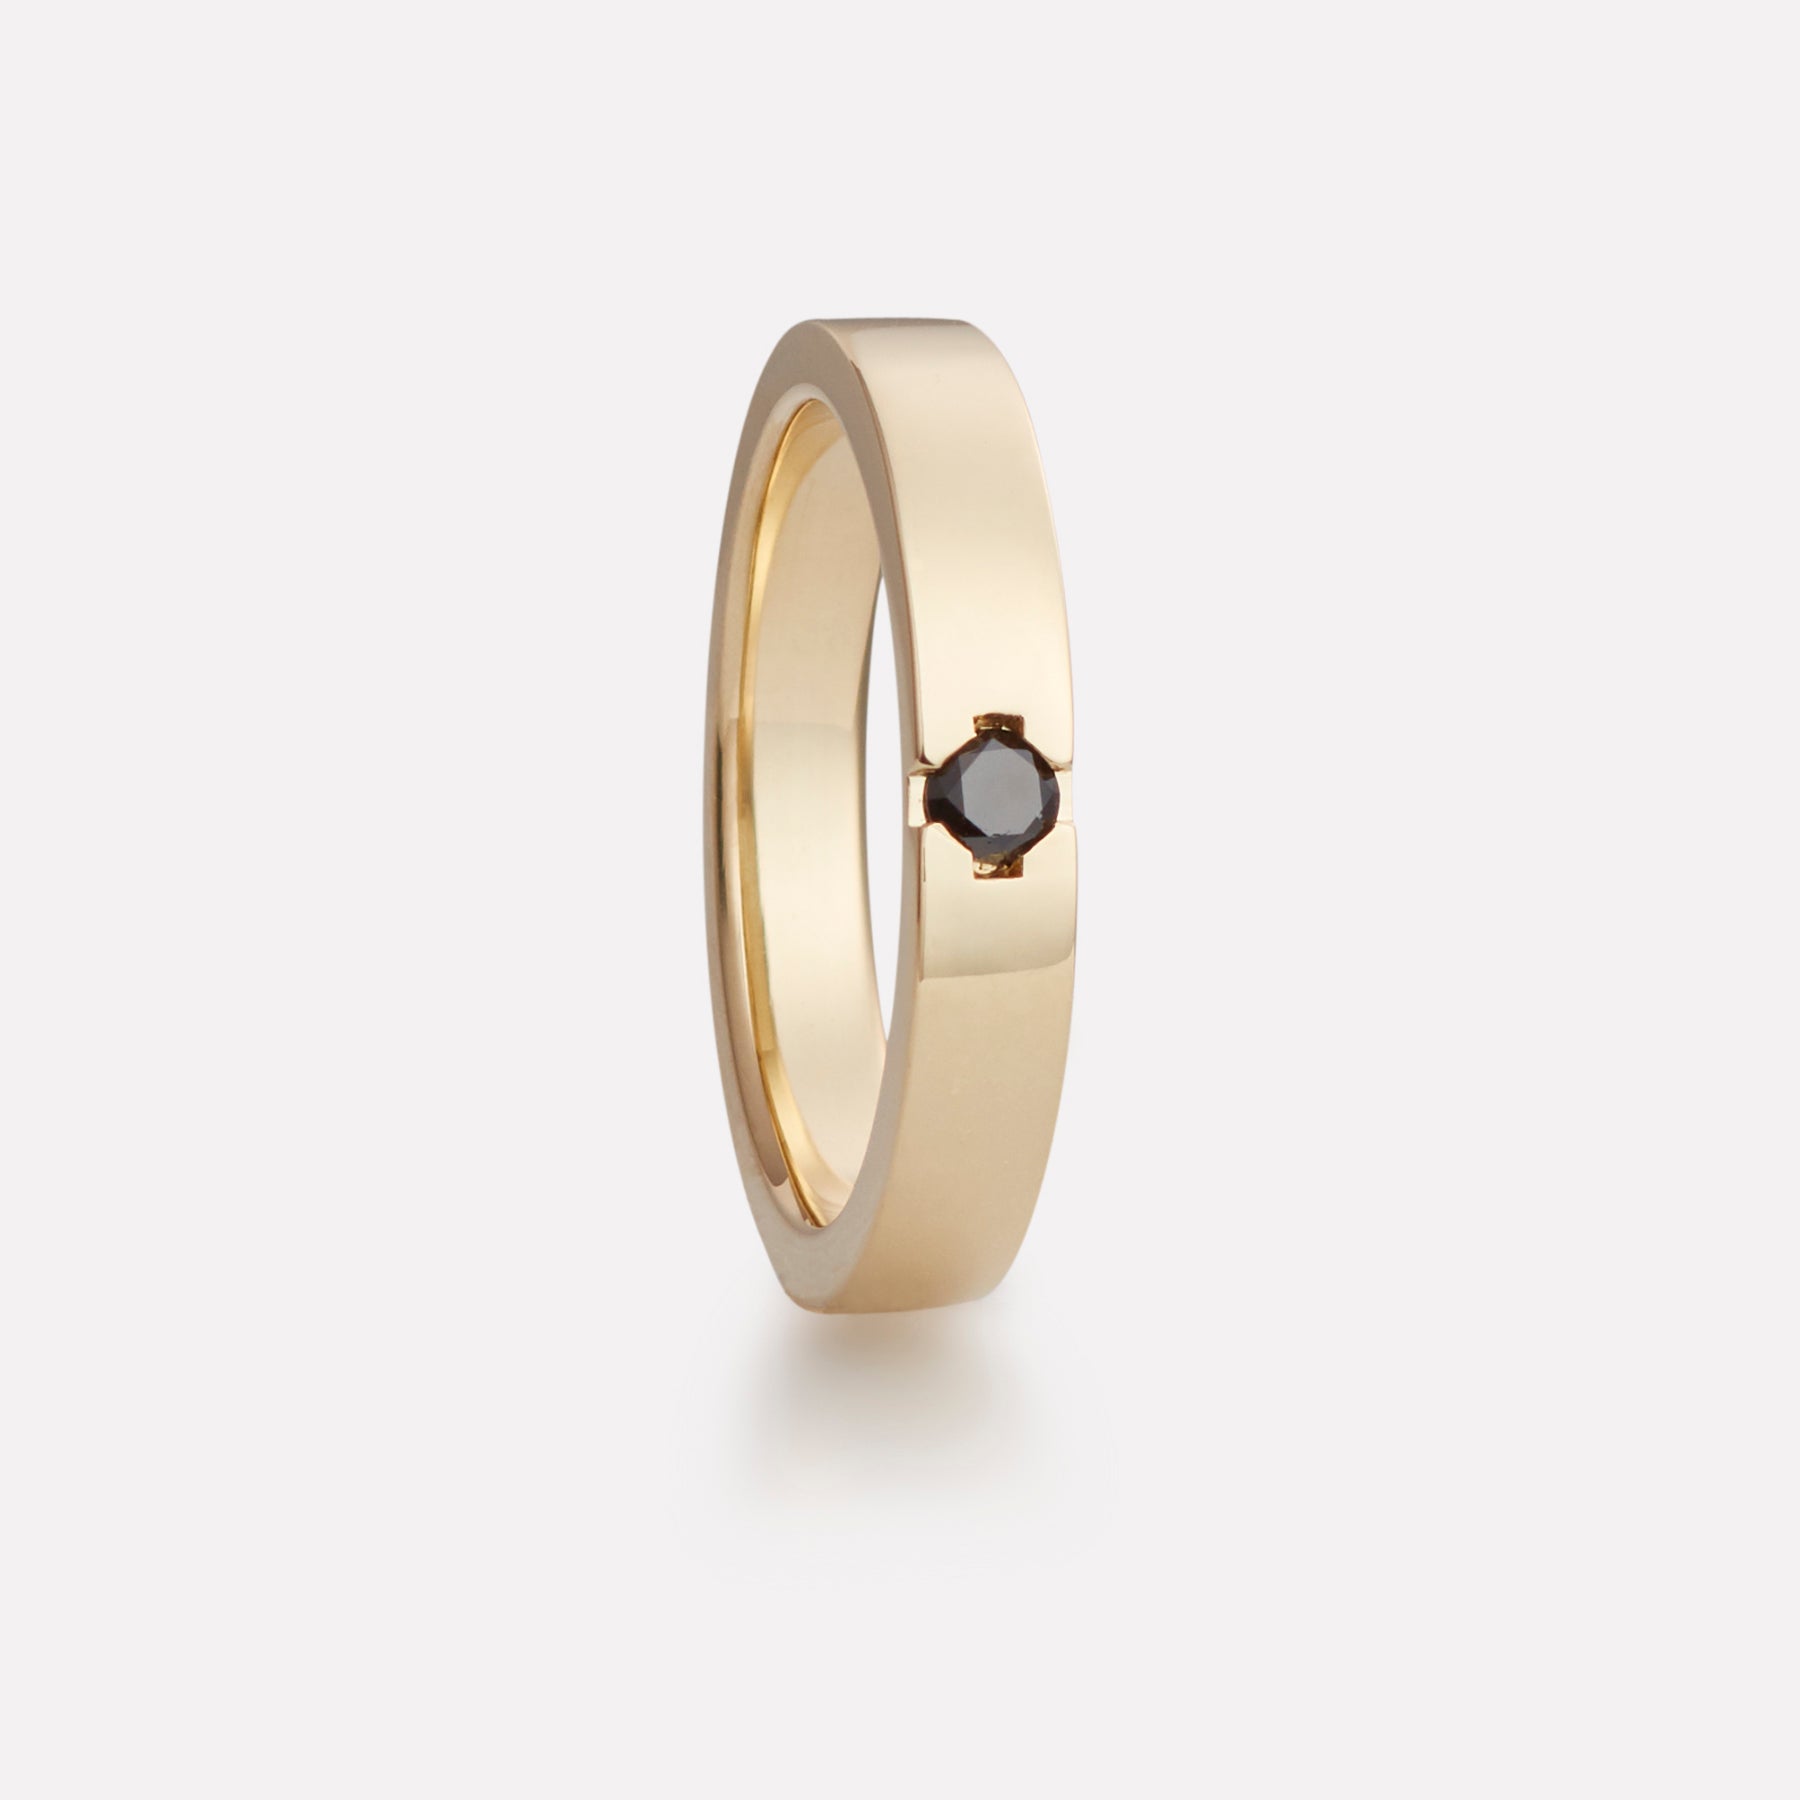 Majestic ring in yellow gold with black diamond, men's